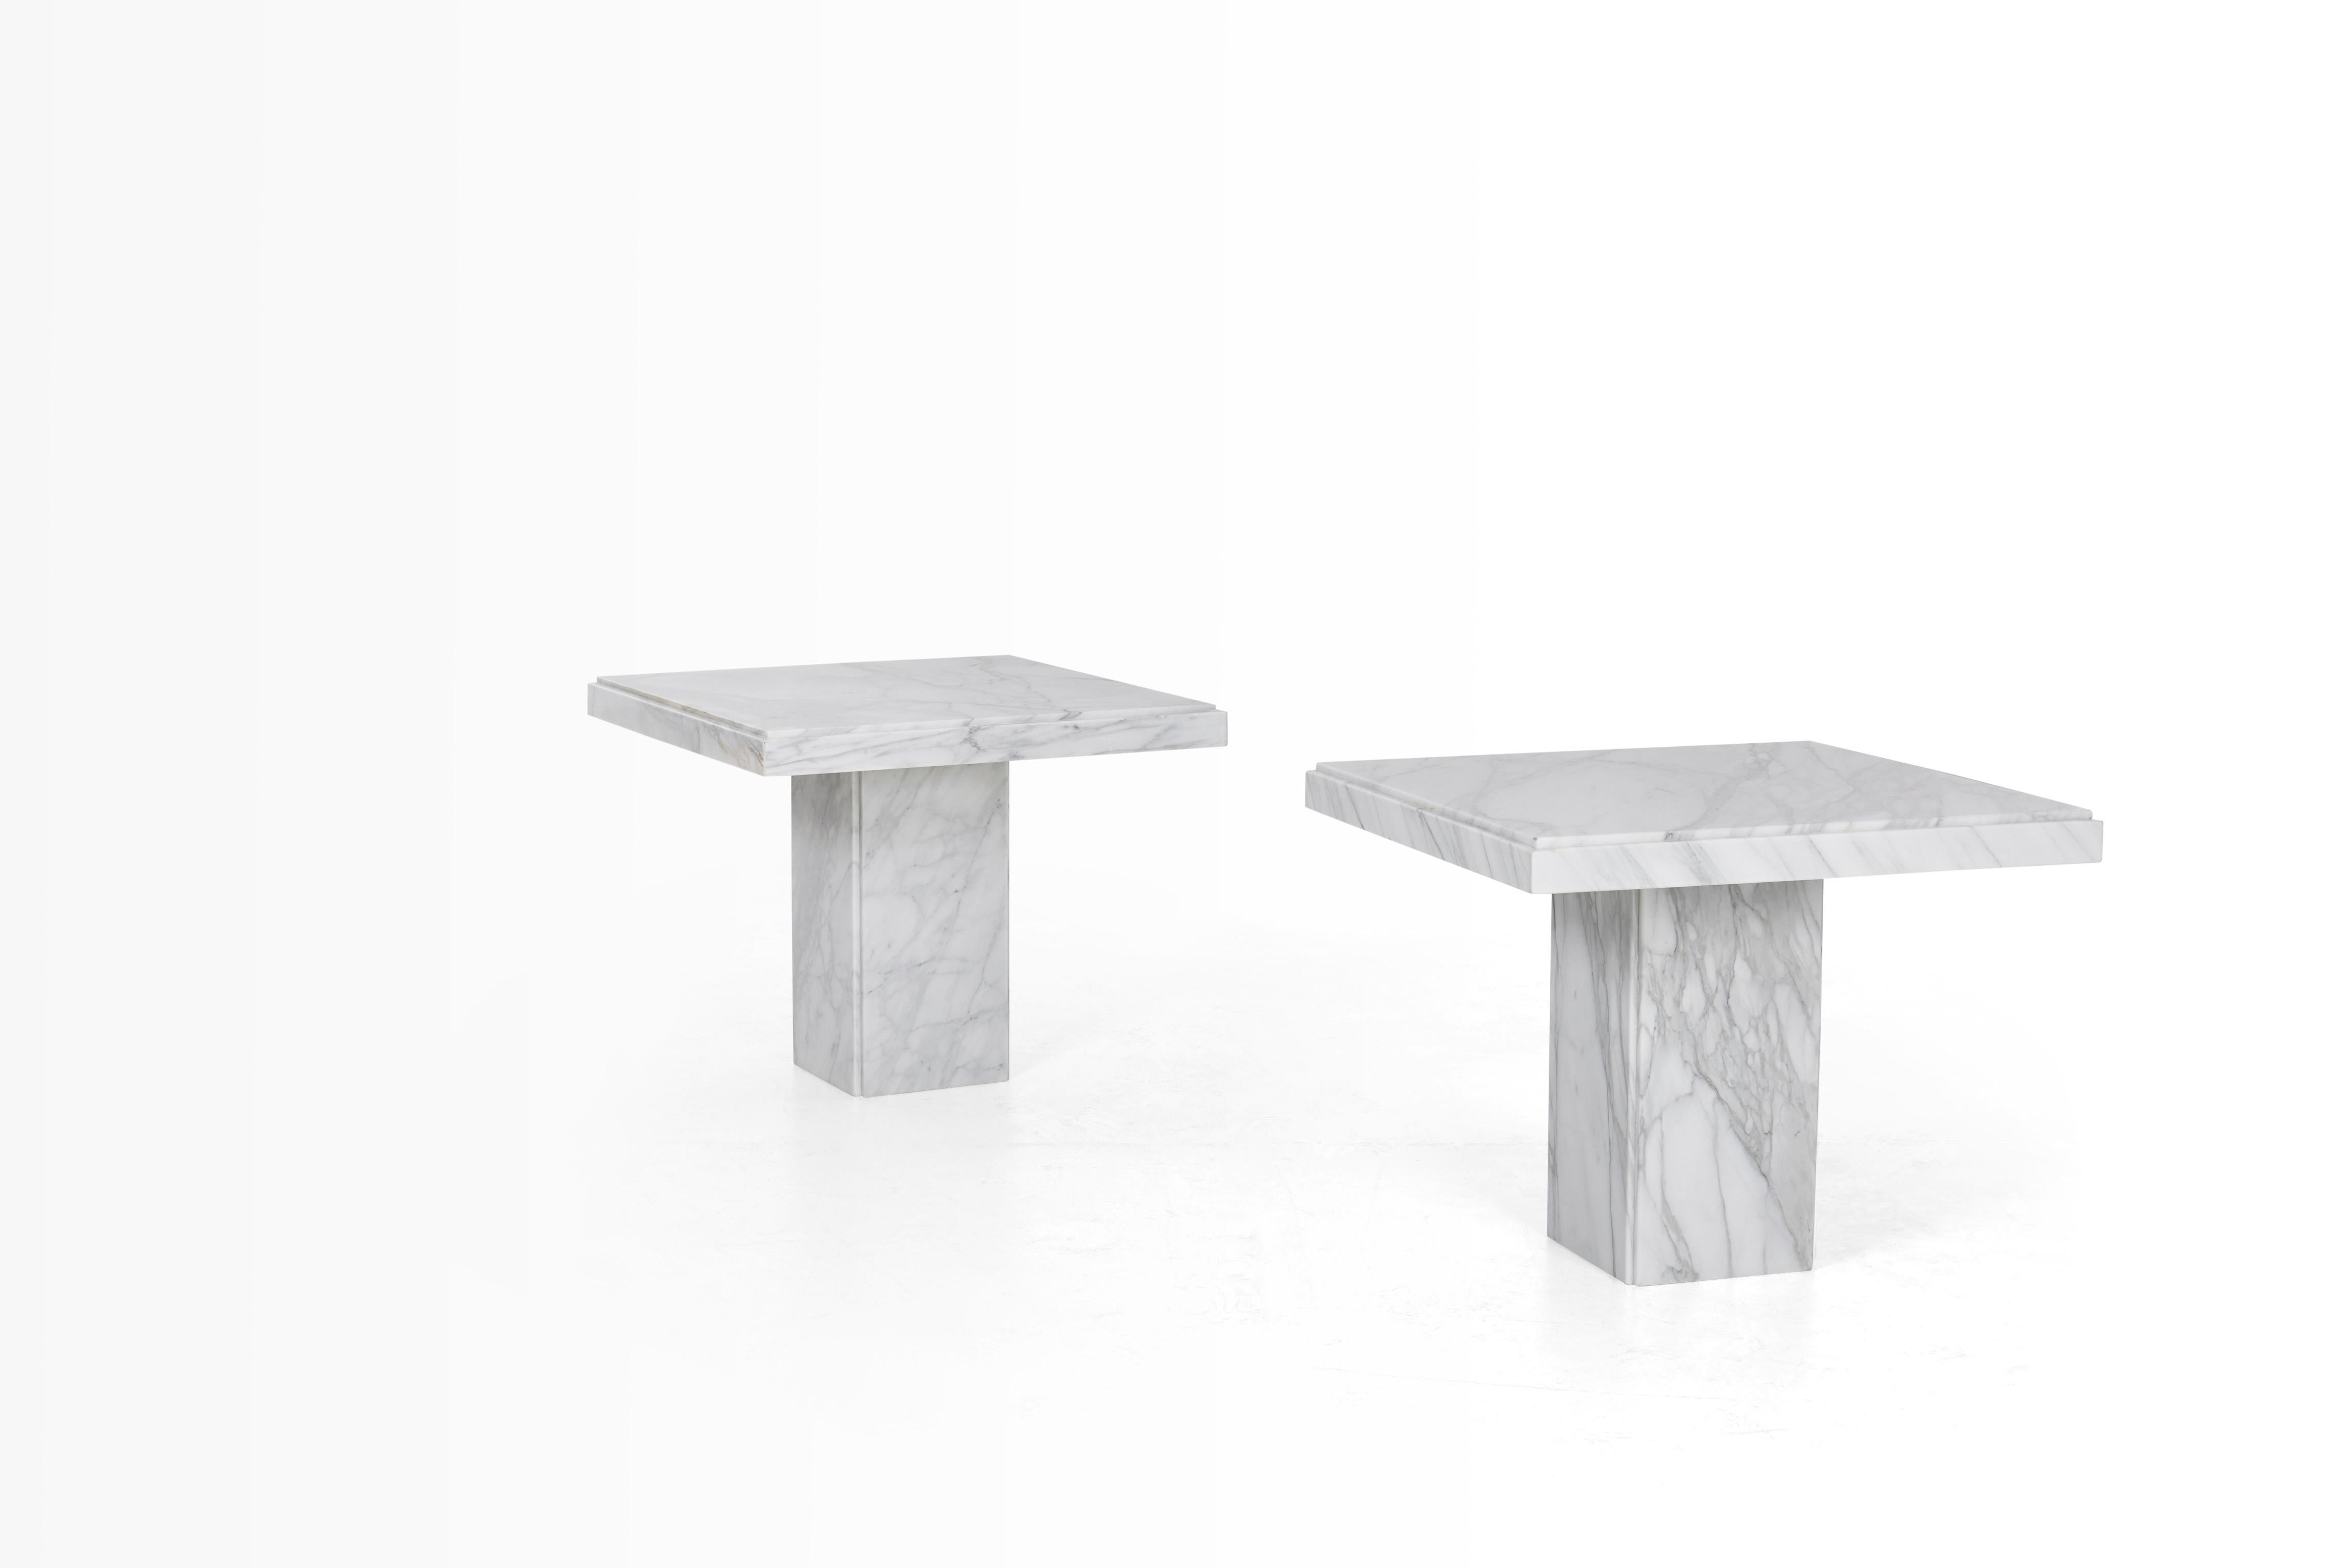 Italian marble end tables, polished Carrara marble with offset square edge details, top 2.5